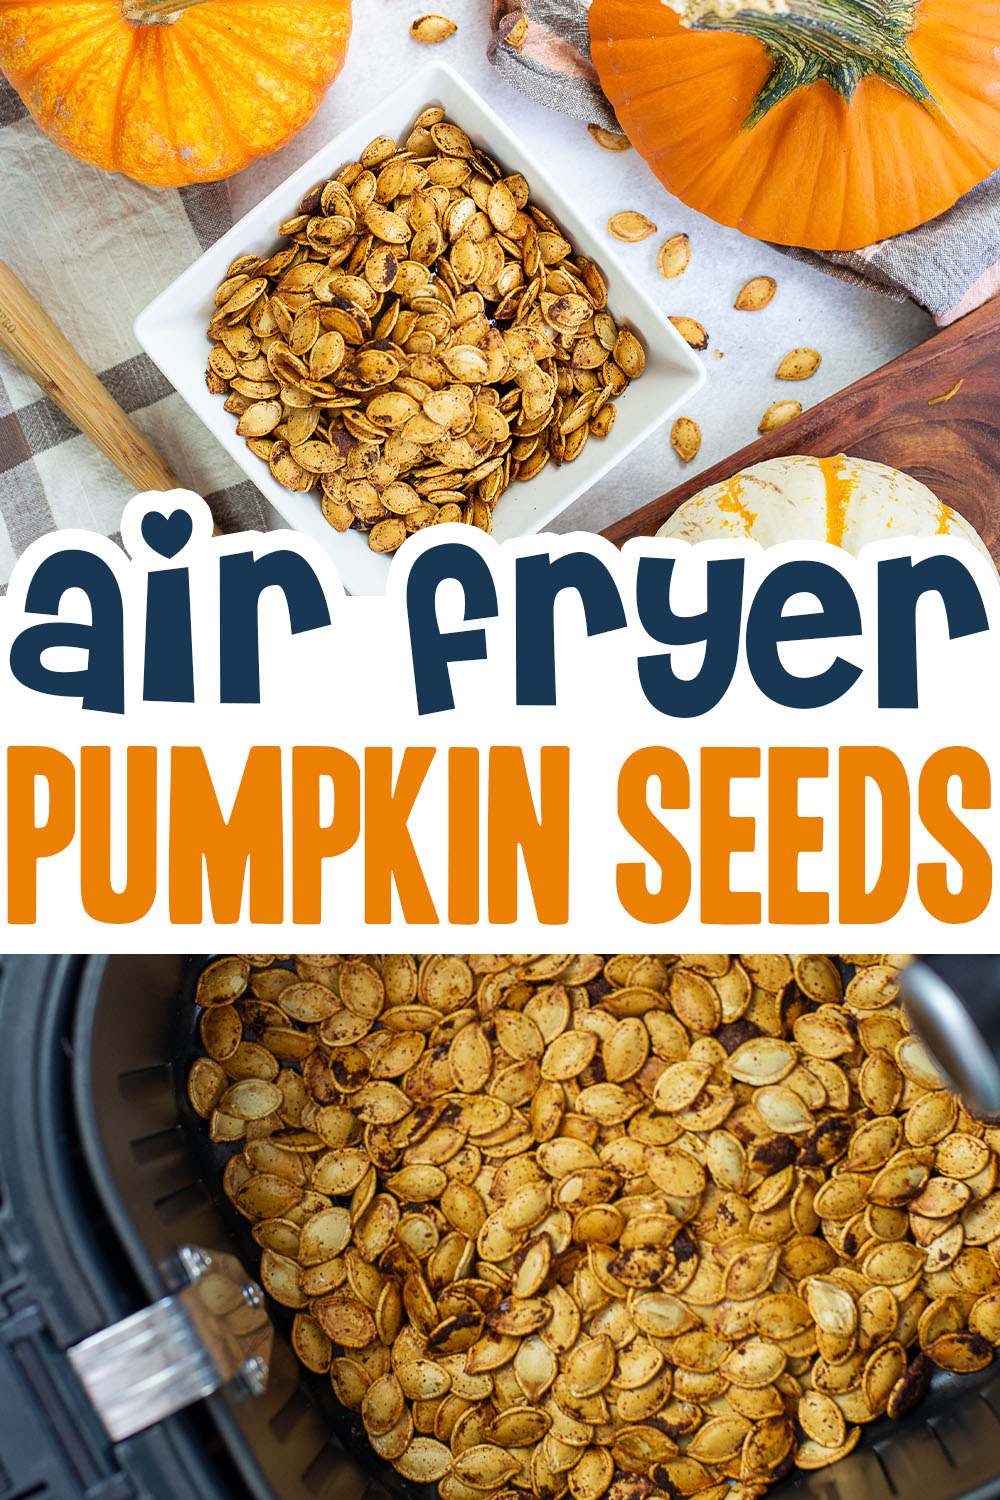 I like to get these pumpkin seeds cooking in the air fryer while we are carving pumpkins!  I get a snack while carving and it gives the pumpkin more purpose!